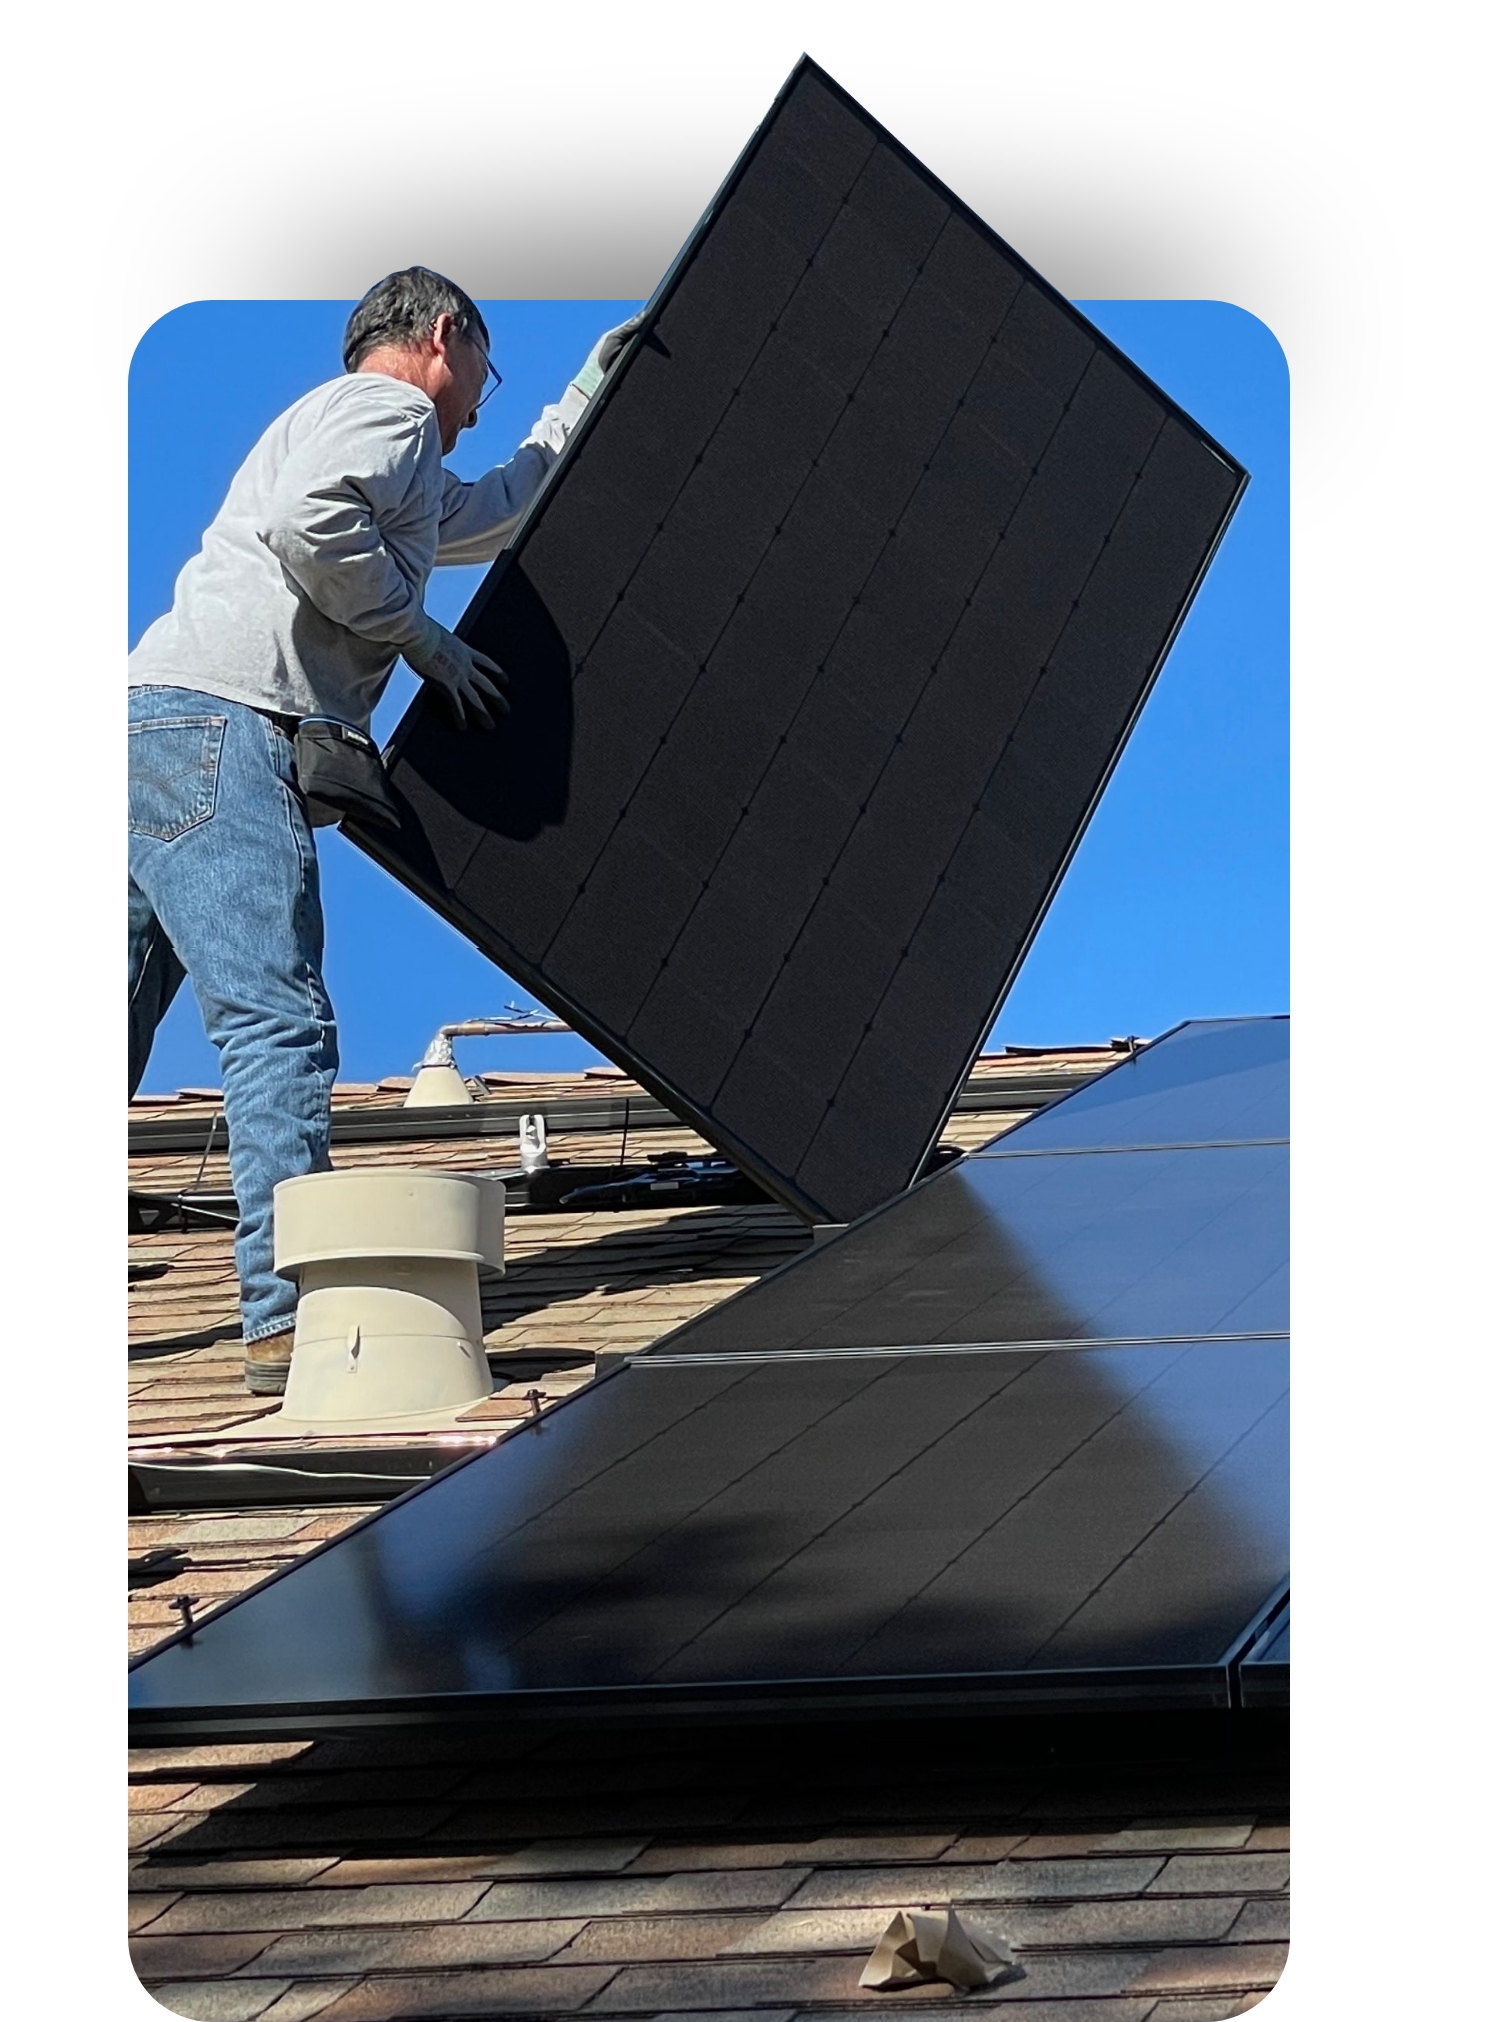 The solar industry is flooded with solar companies that quickly go out of business. Our solar panel services are top-notch, and as a member of the Denver community for 20 years, we are not going anywhere.